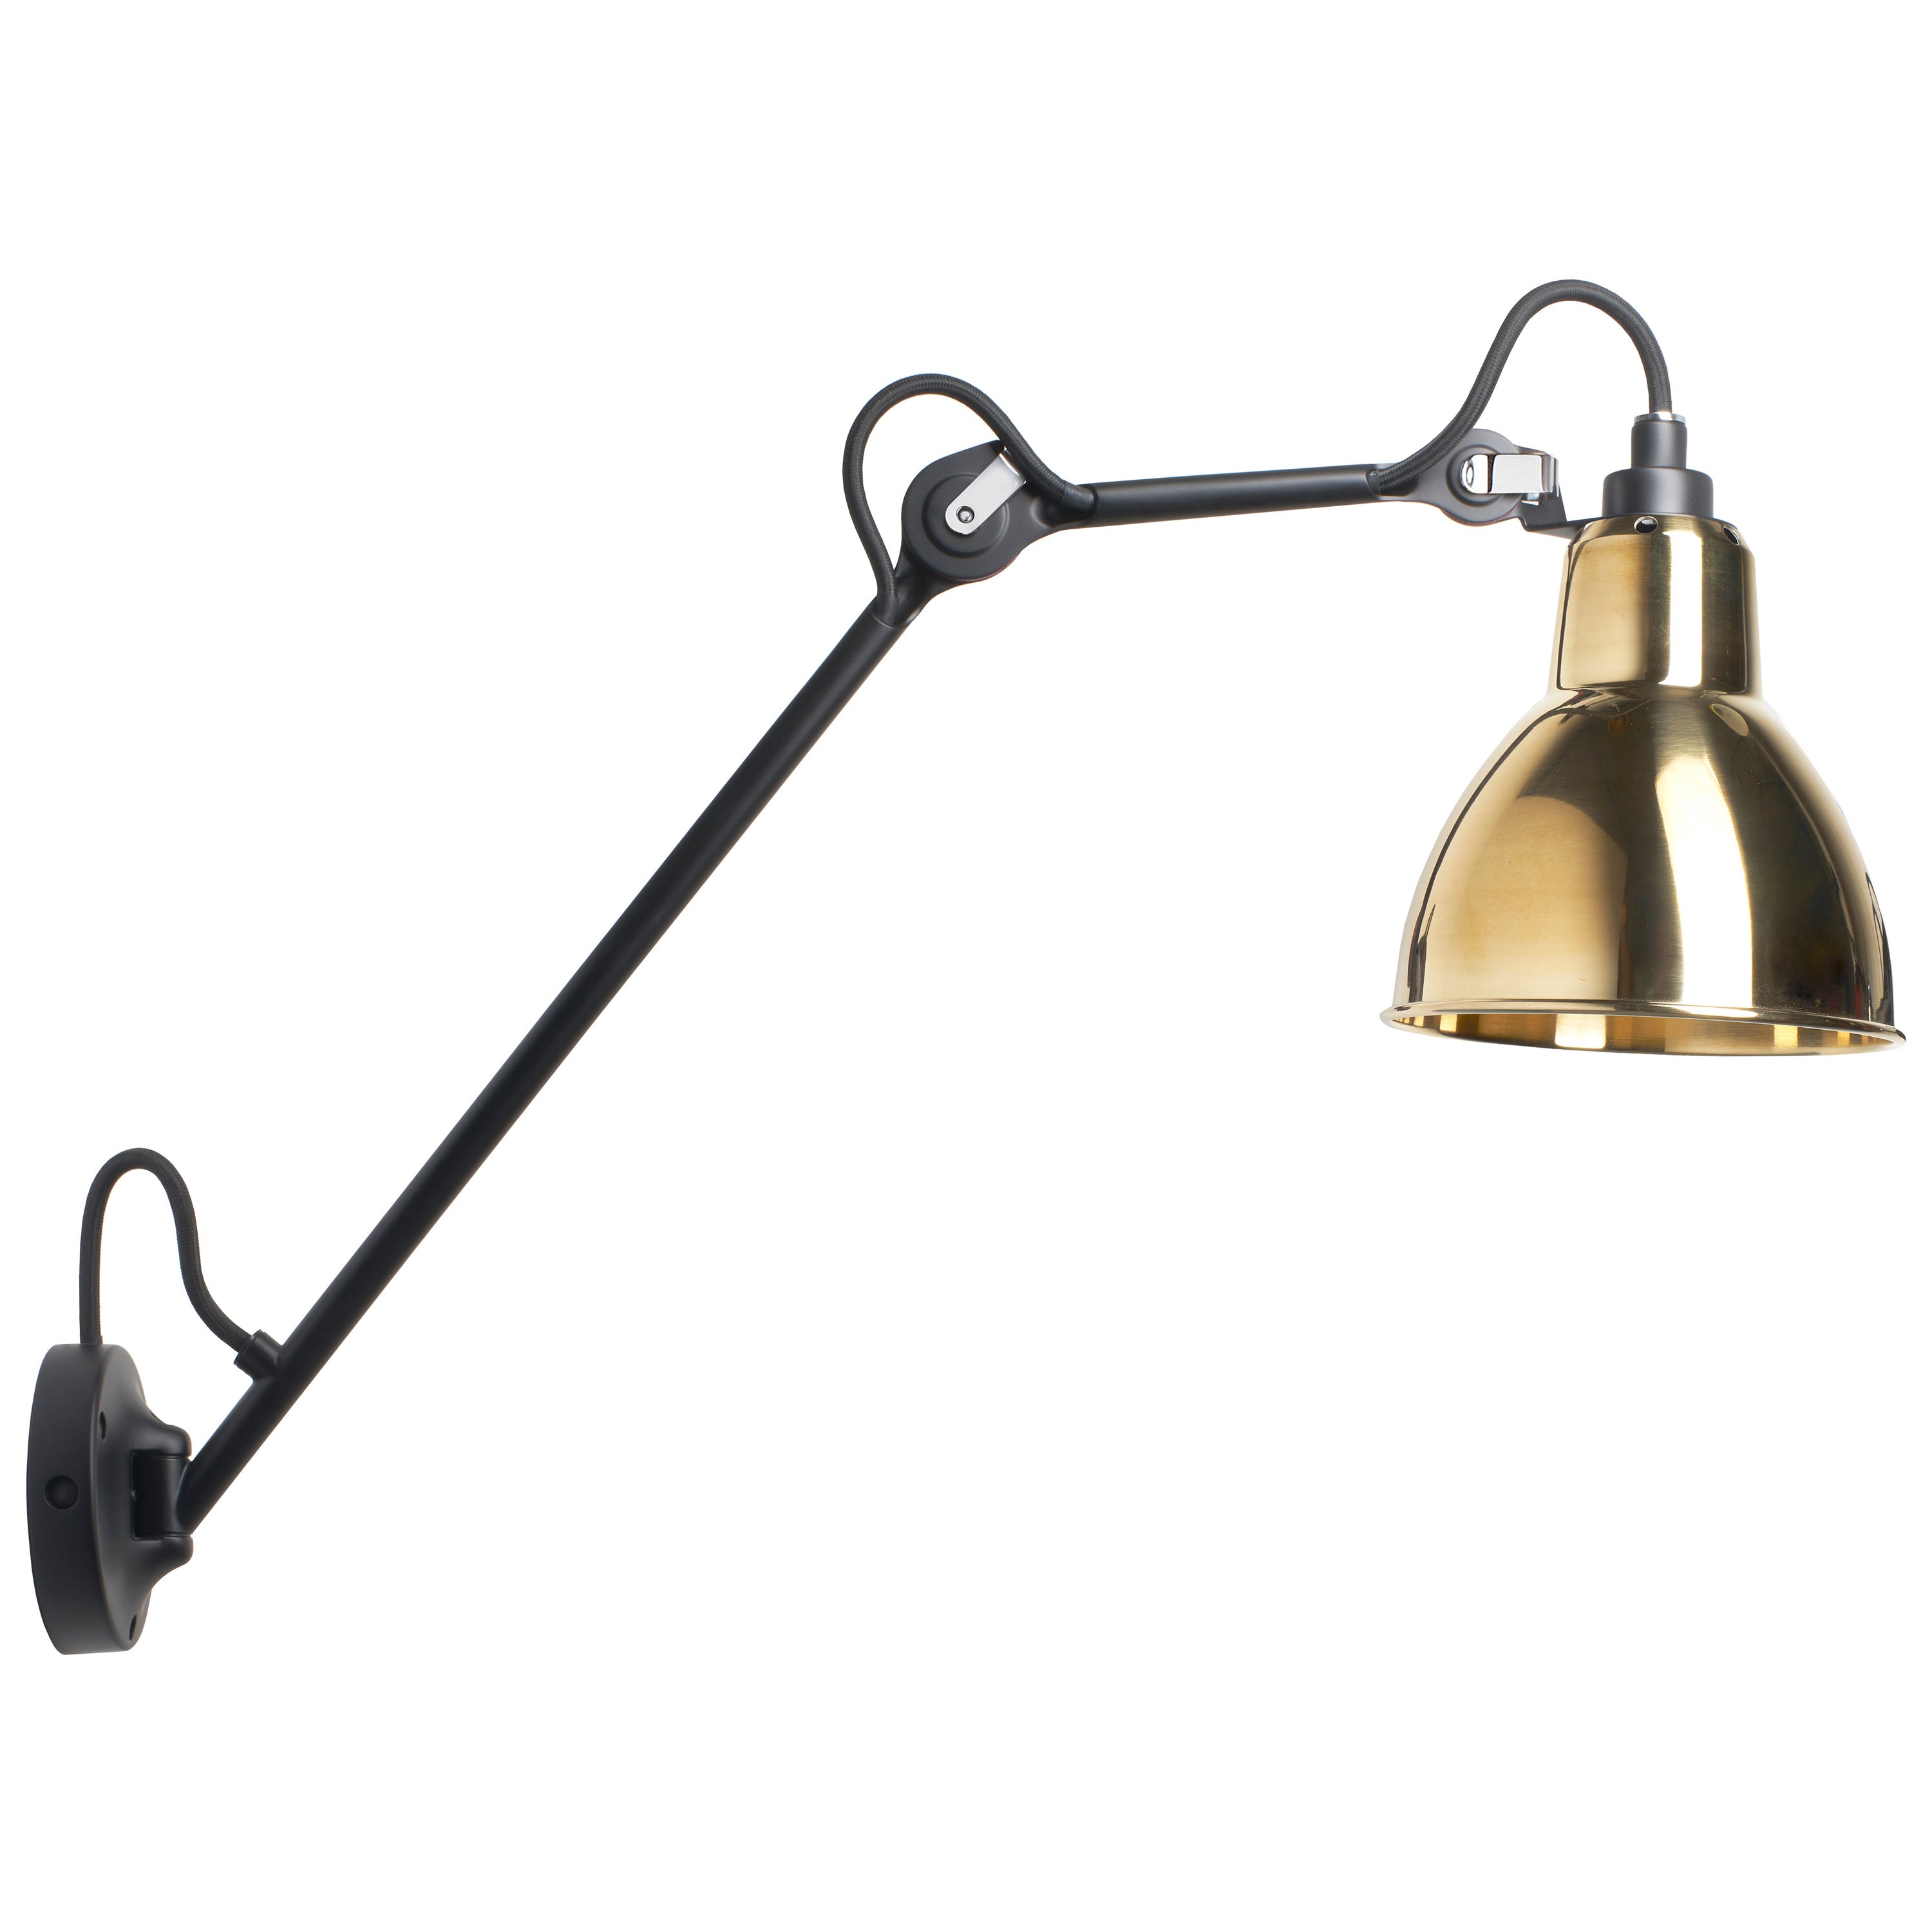 DCW Editions La Lampe Gras N°122 Wall Lamp in Black Arm and Brass Shade For Sale